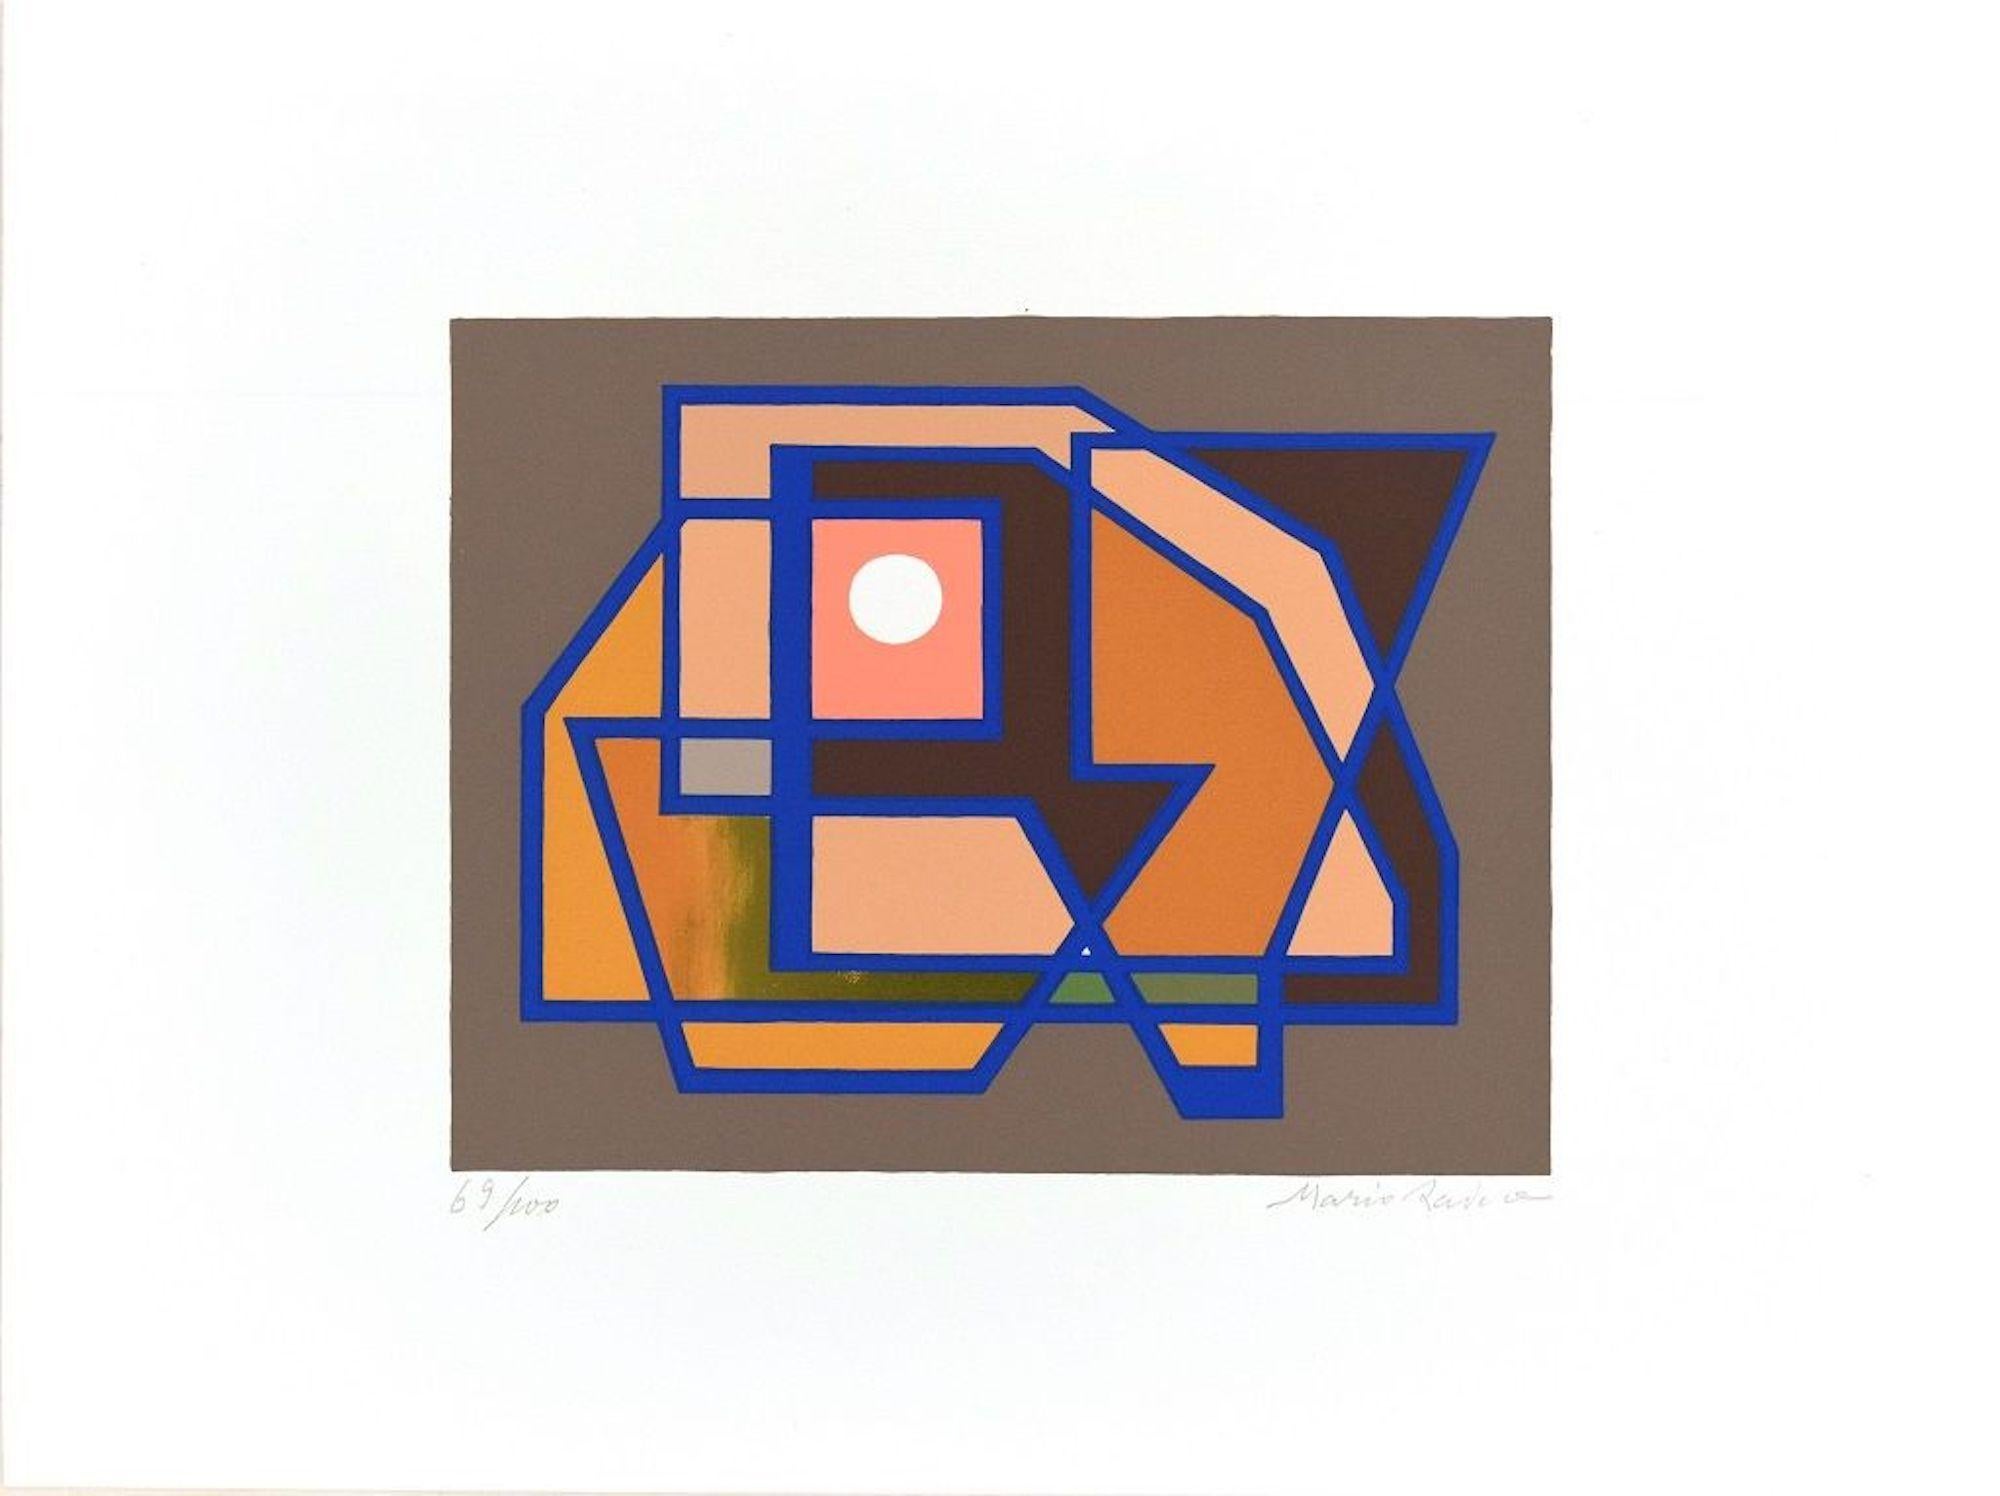 Image dimensions: 19 x 24 cm.

Il Sole is a beautiful original colored serigraph on paper, realized by the Italian artist and one of the pioneer of the Abstract art, Mario Radice (1898-1987) and published in 1964 by La Nuova Foglio, as an